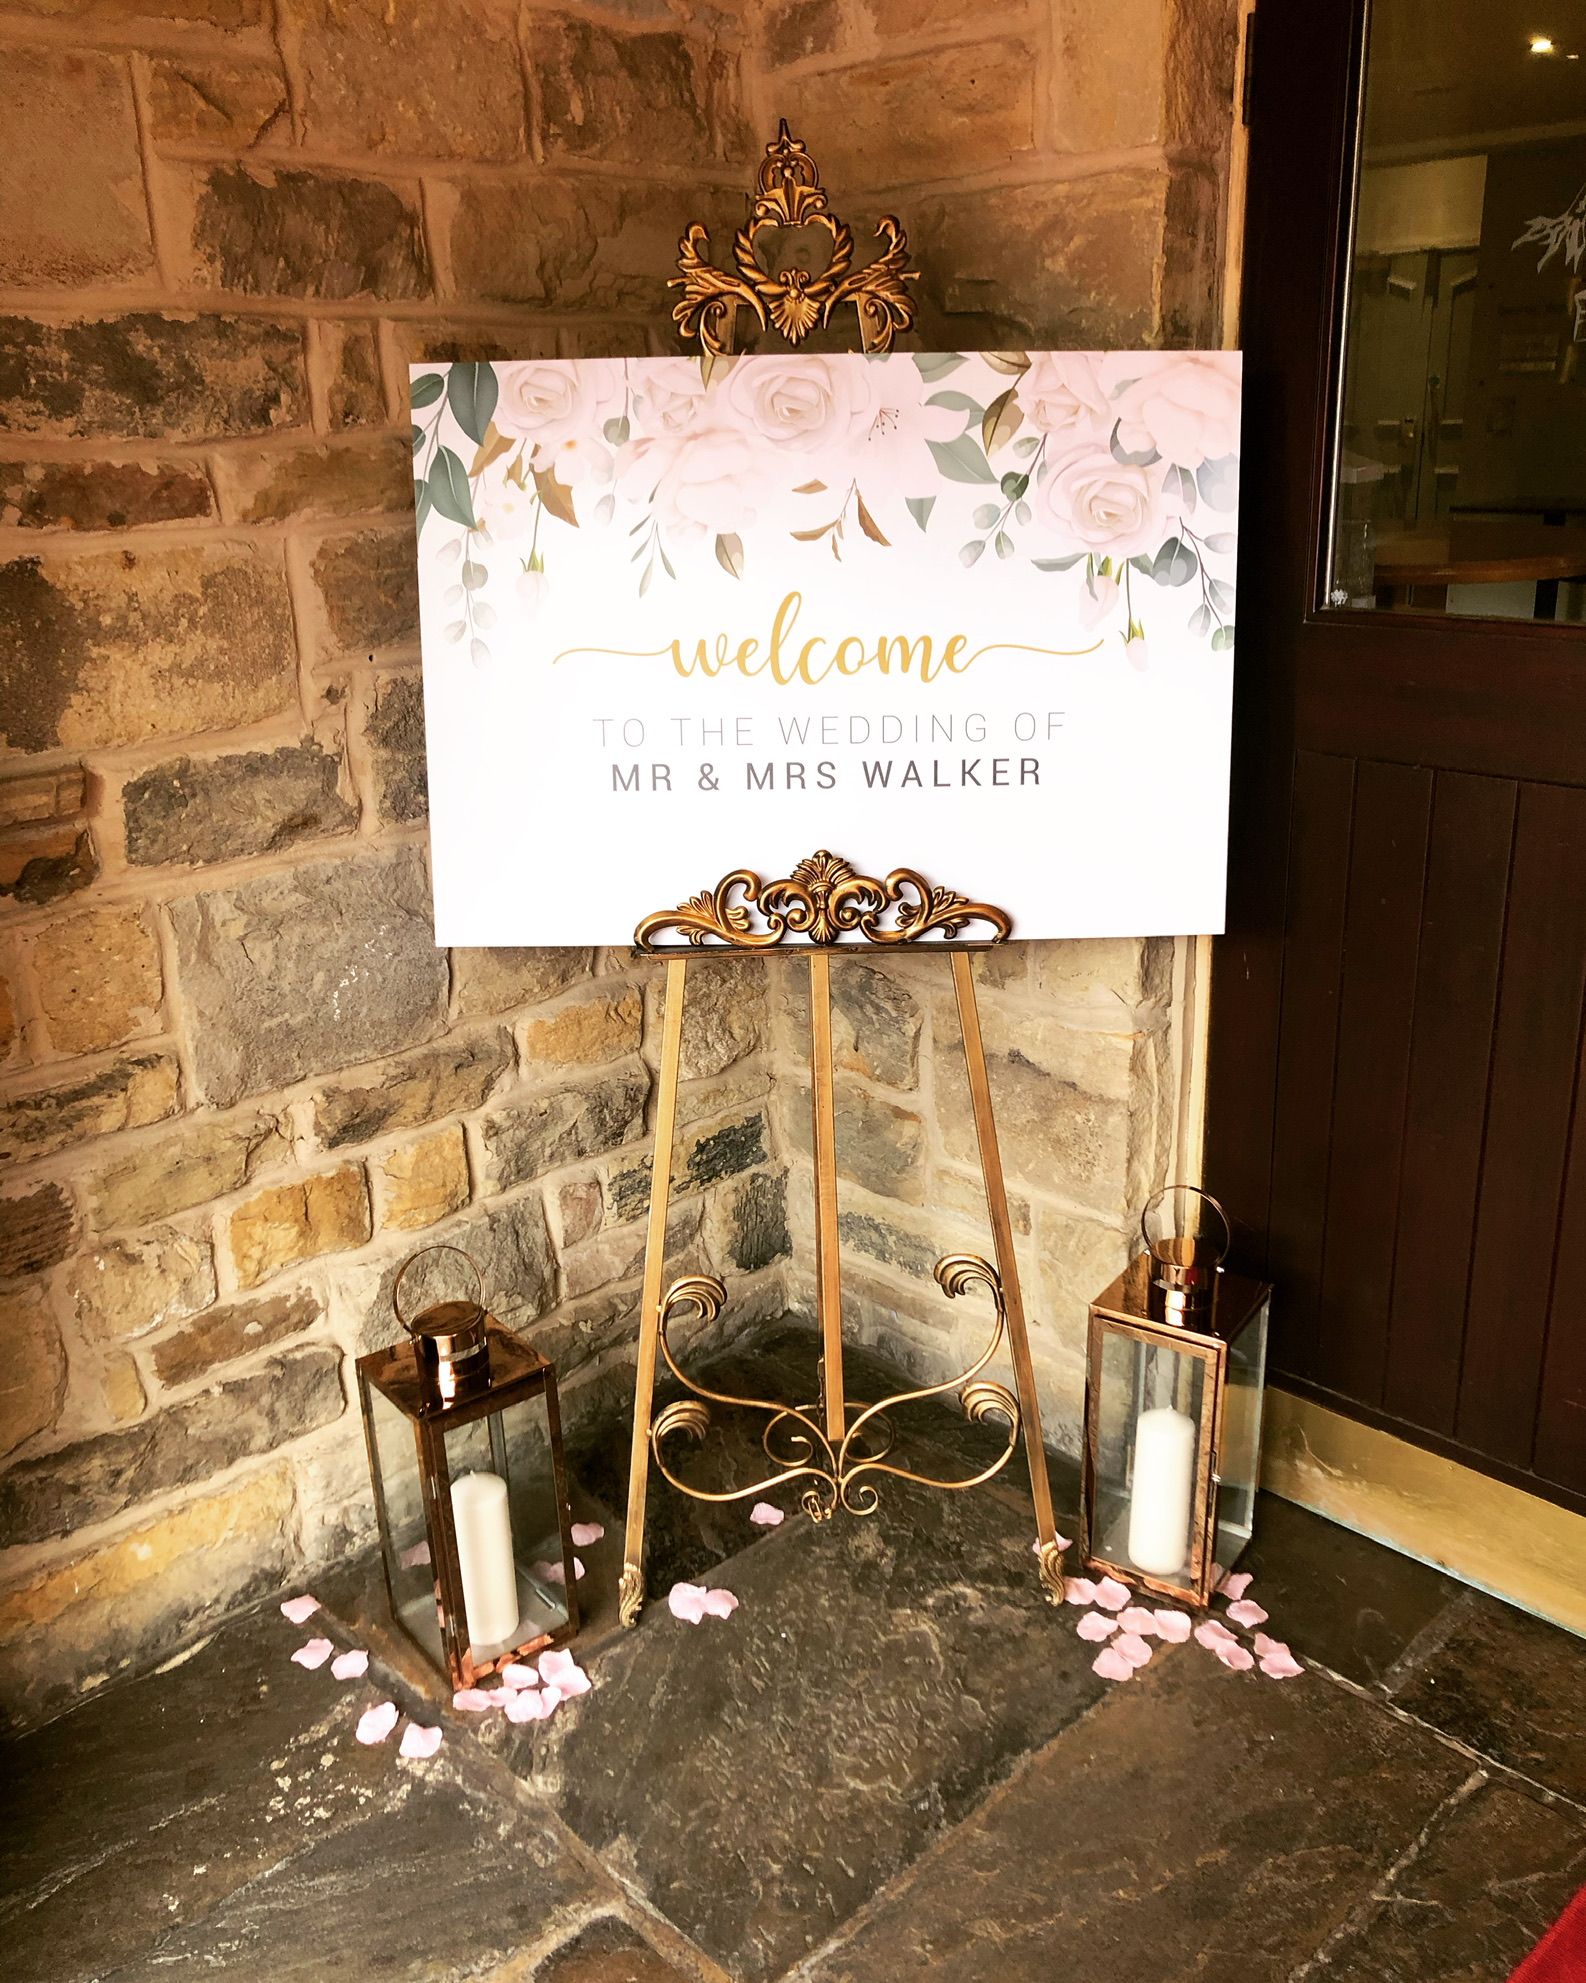 a welcome sign with candles and petals on the floor.